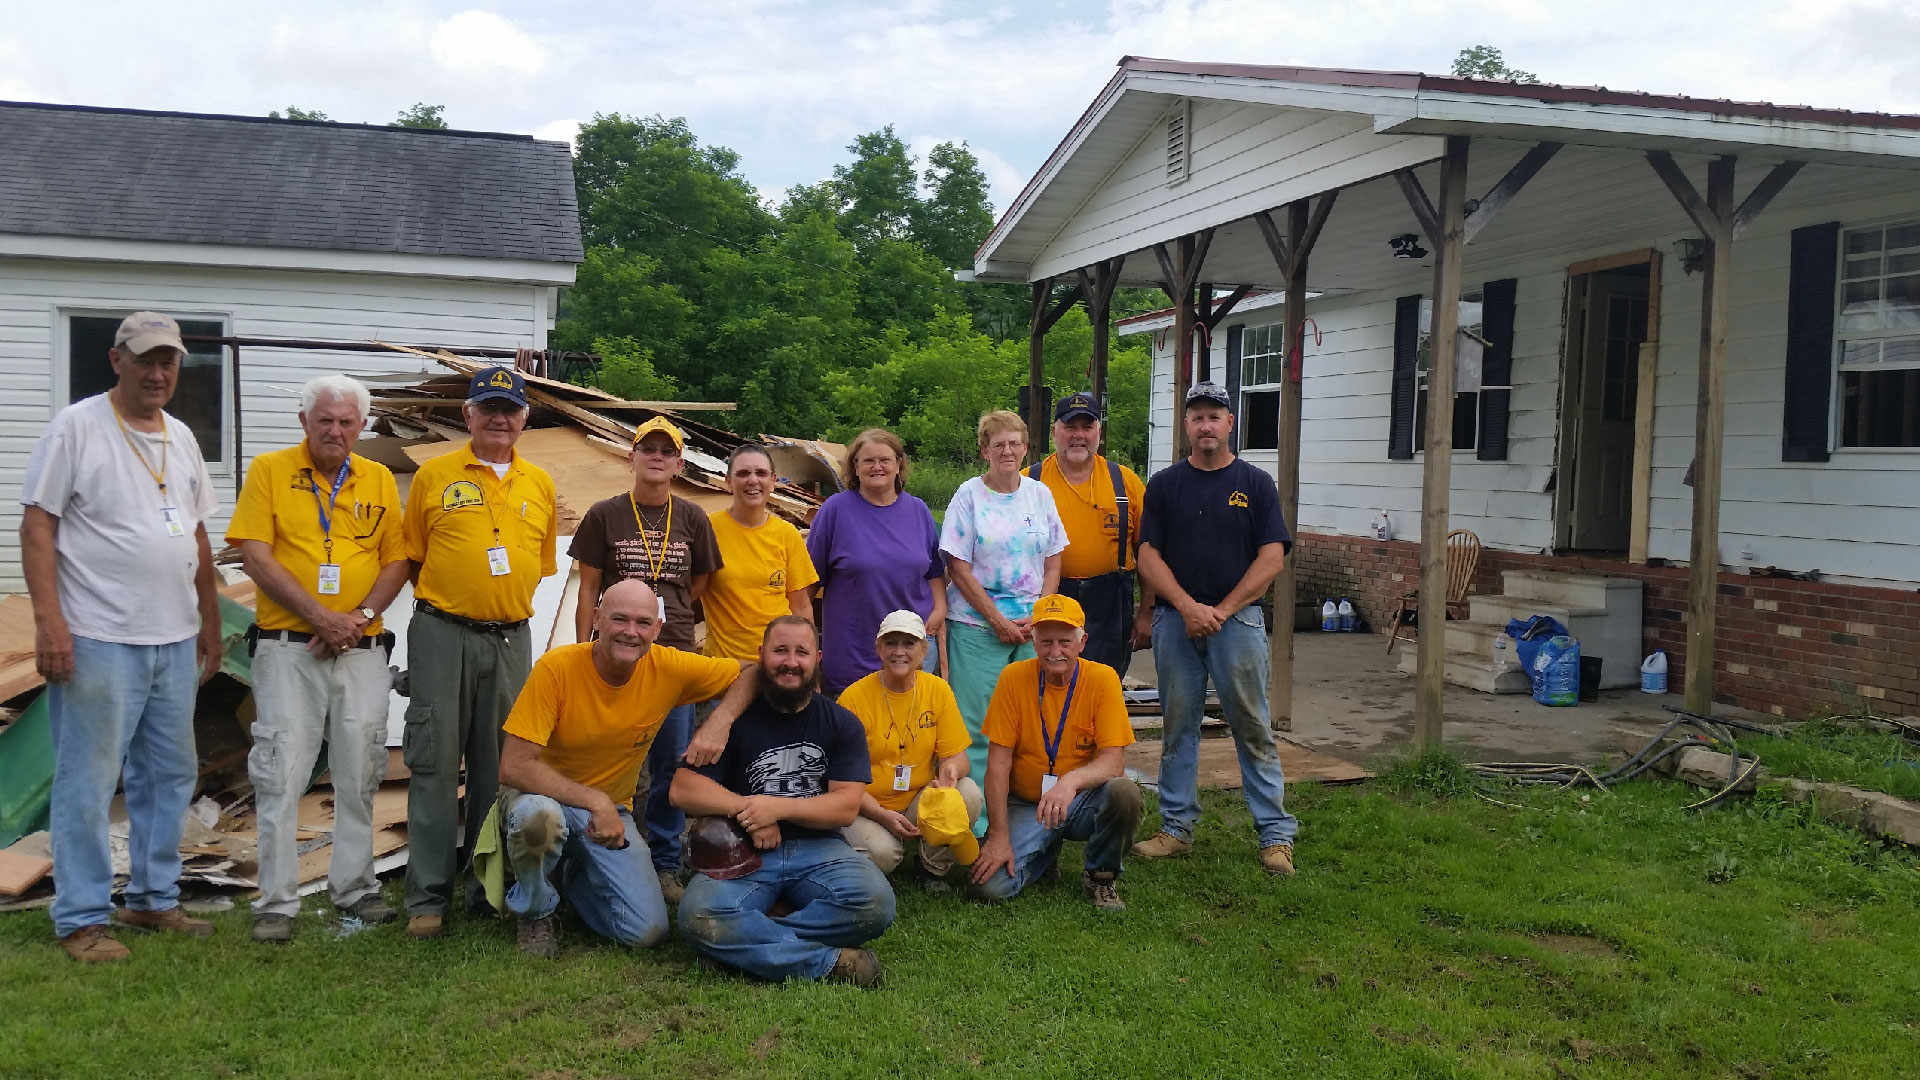 The Brookwood Church Disaster relief team helping restore balance after a time of crisis.